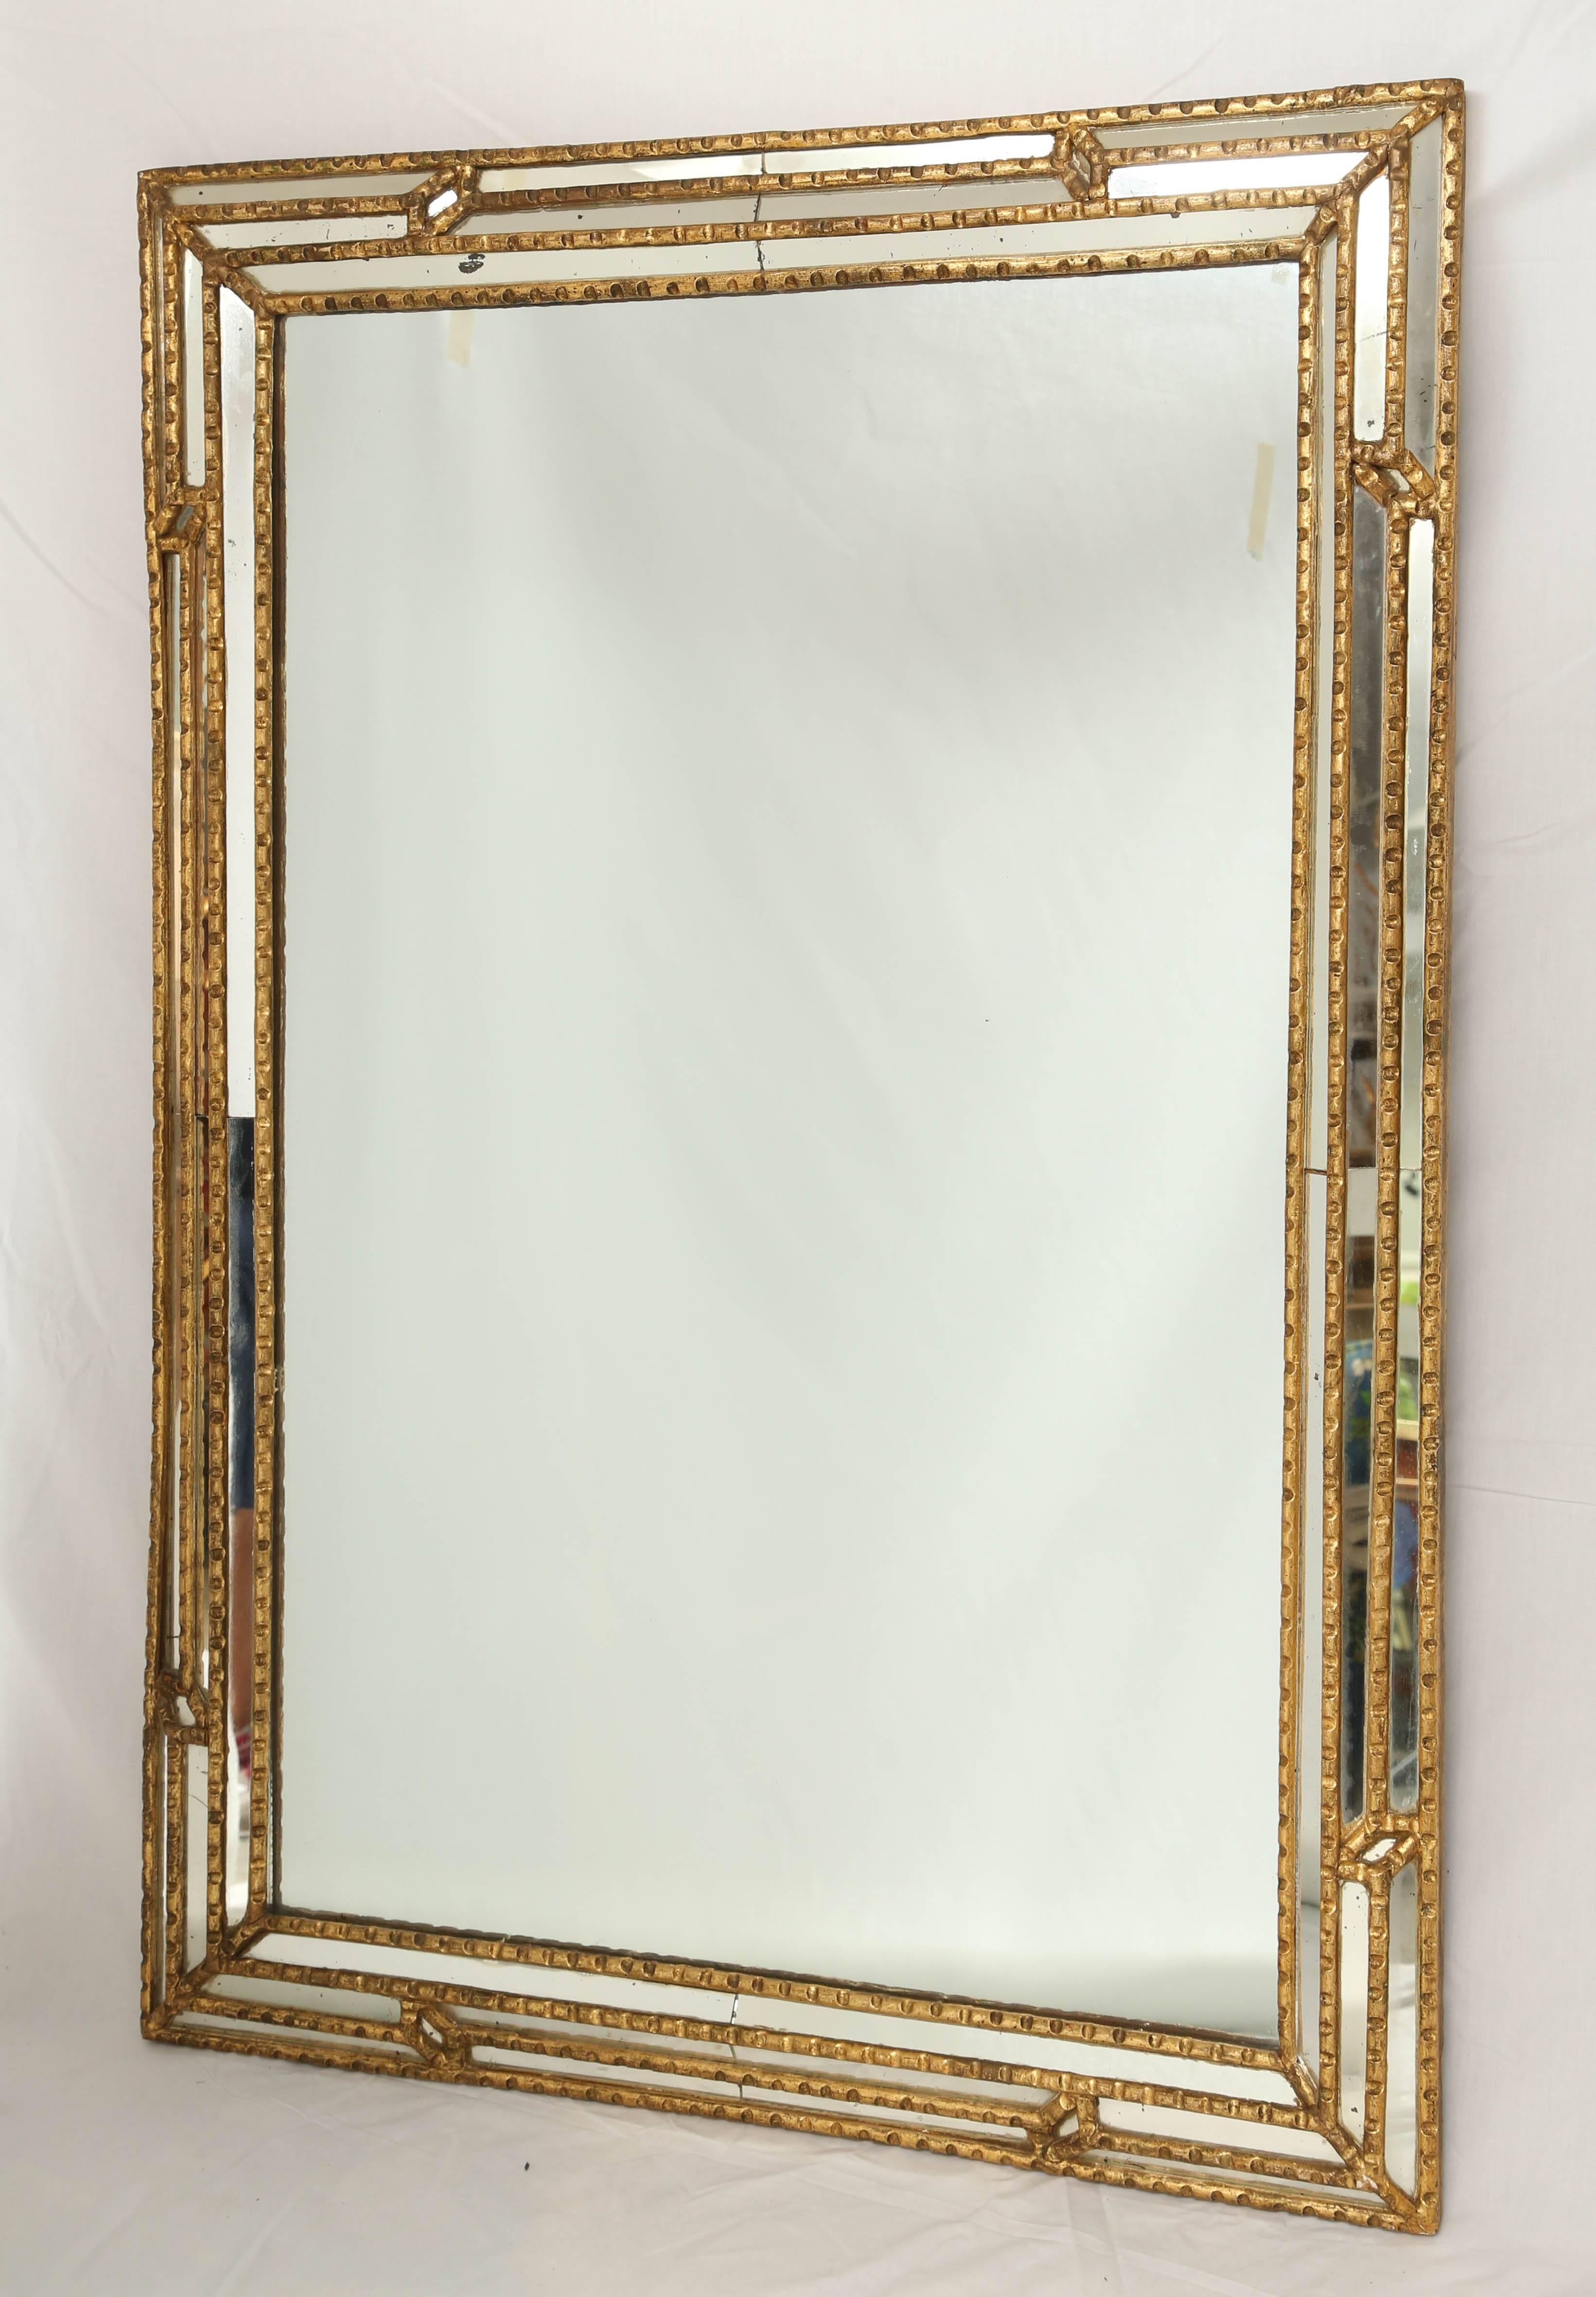 Wall mirror, having a frame of gadrooned giltwood, its rectangular mirror plate, in a mitered border of matching mirror relief.

Stock ID: D9359